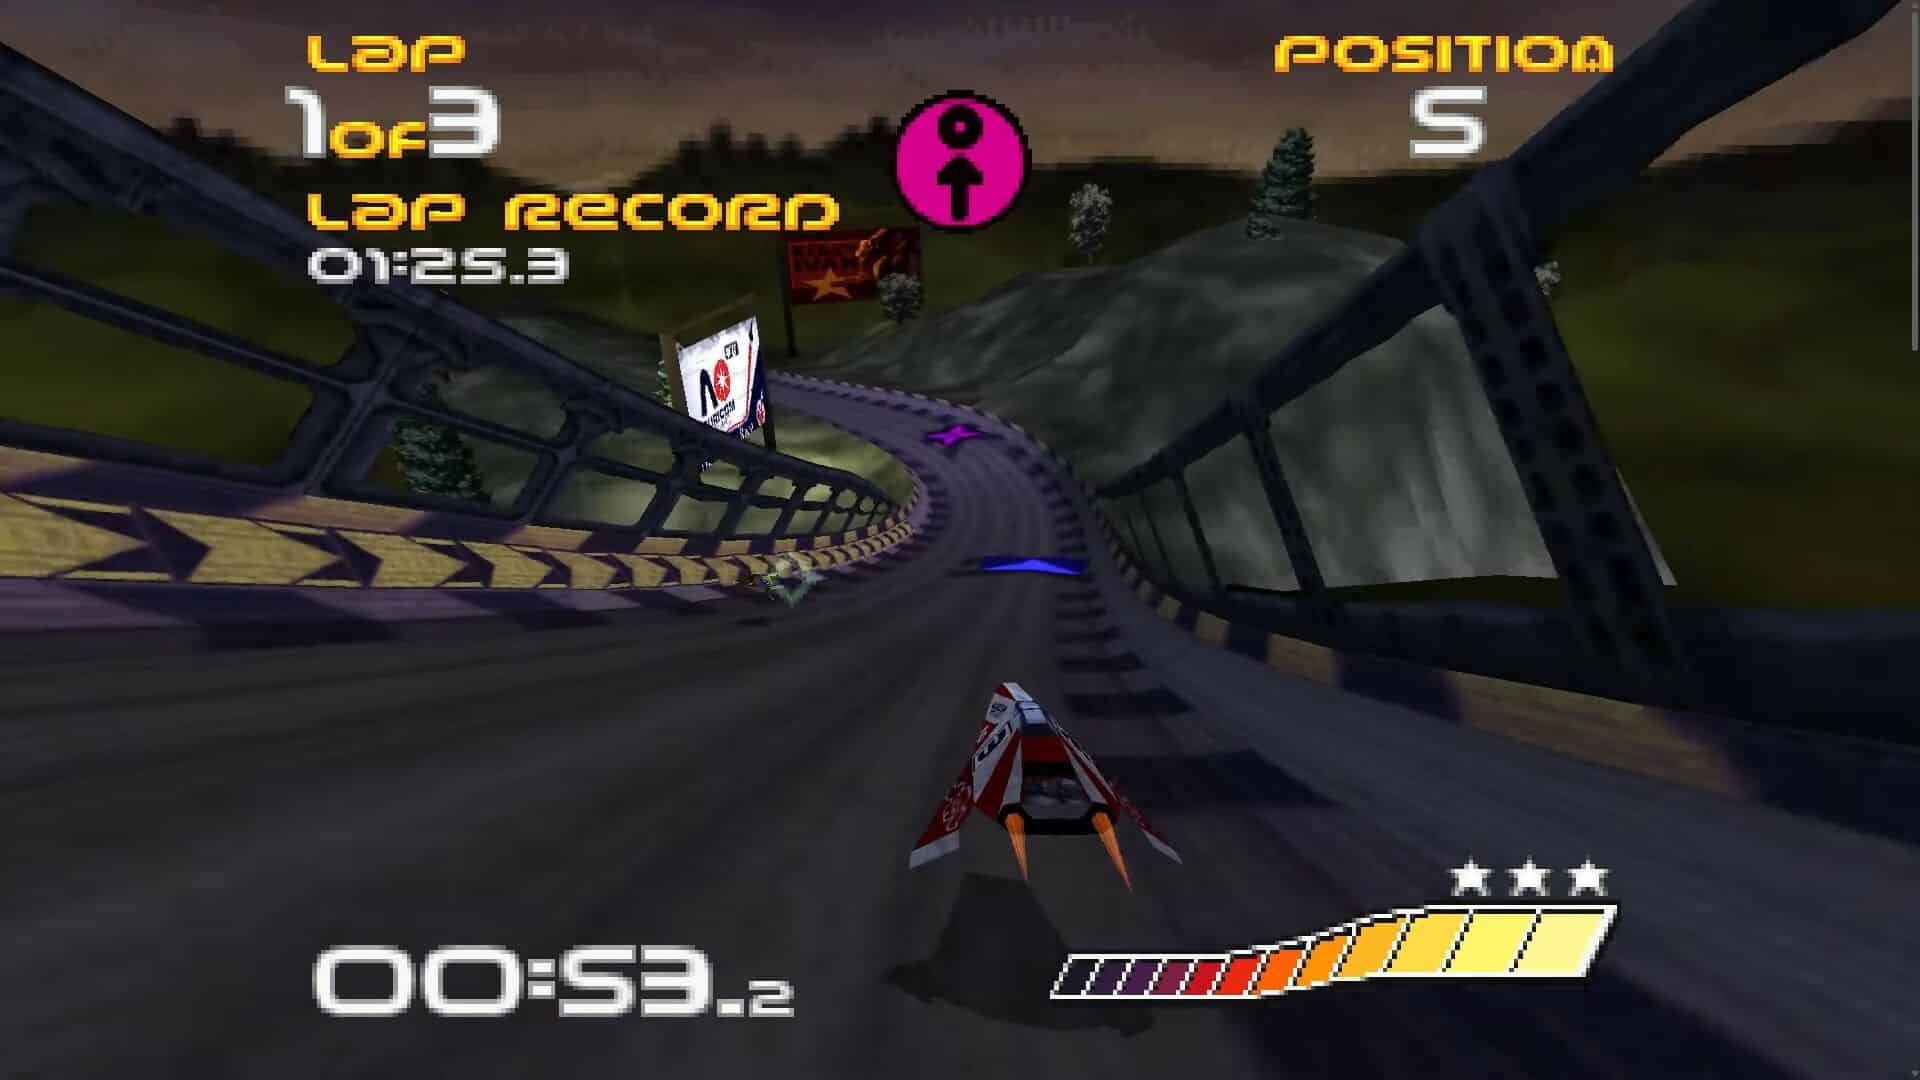 Wipeout gameplay